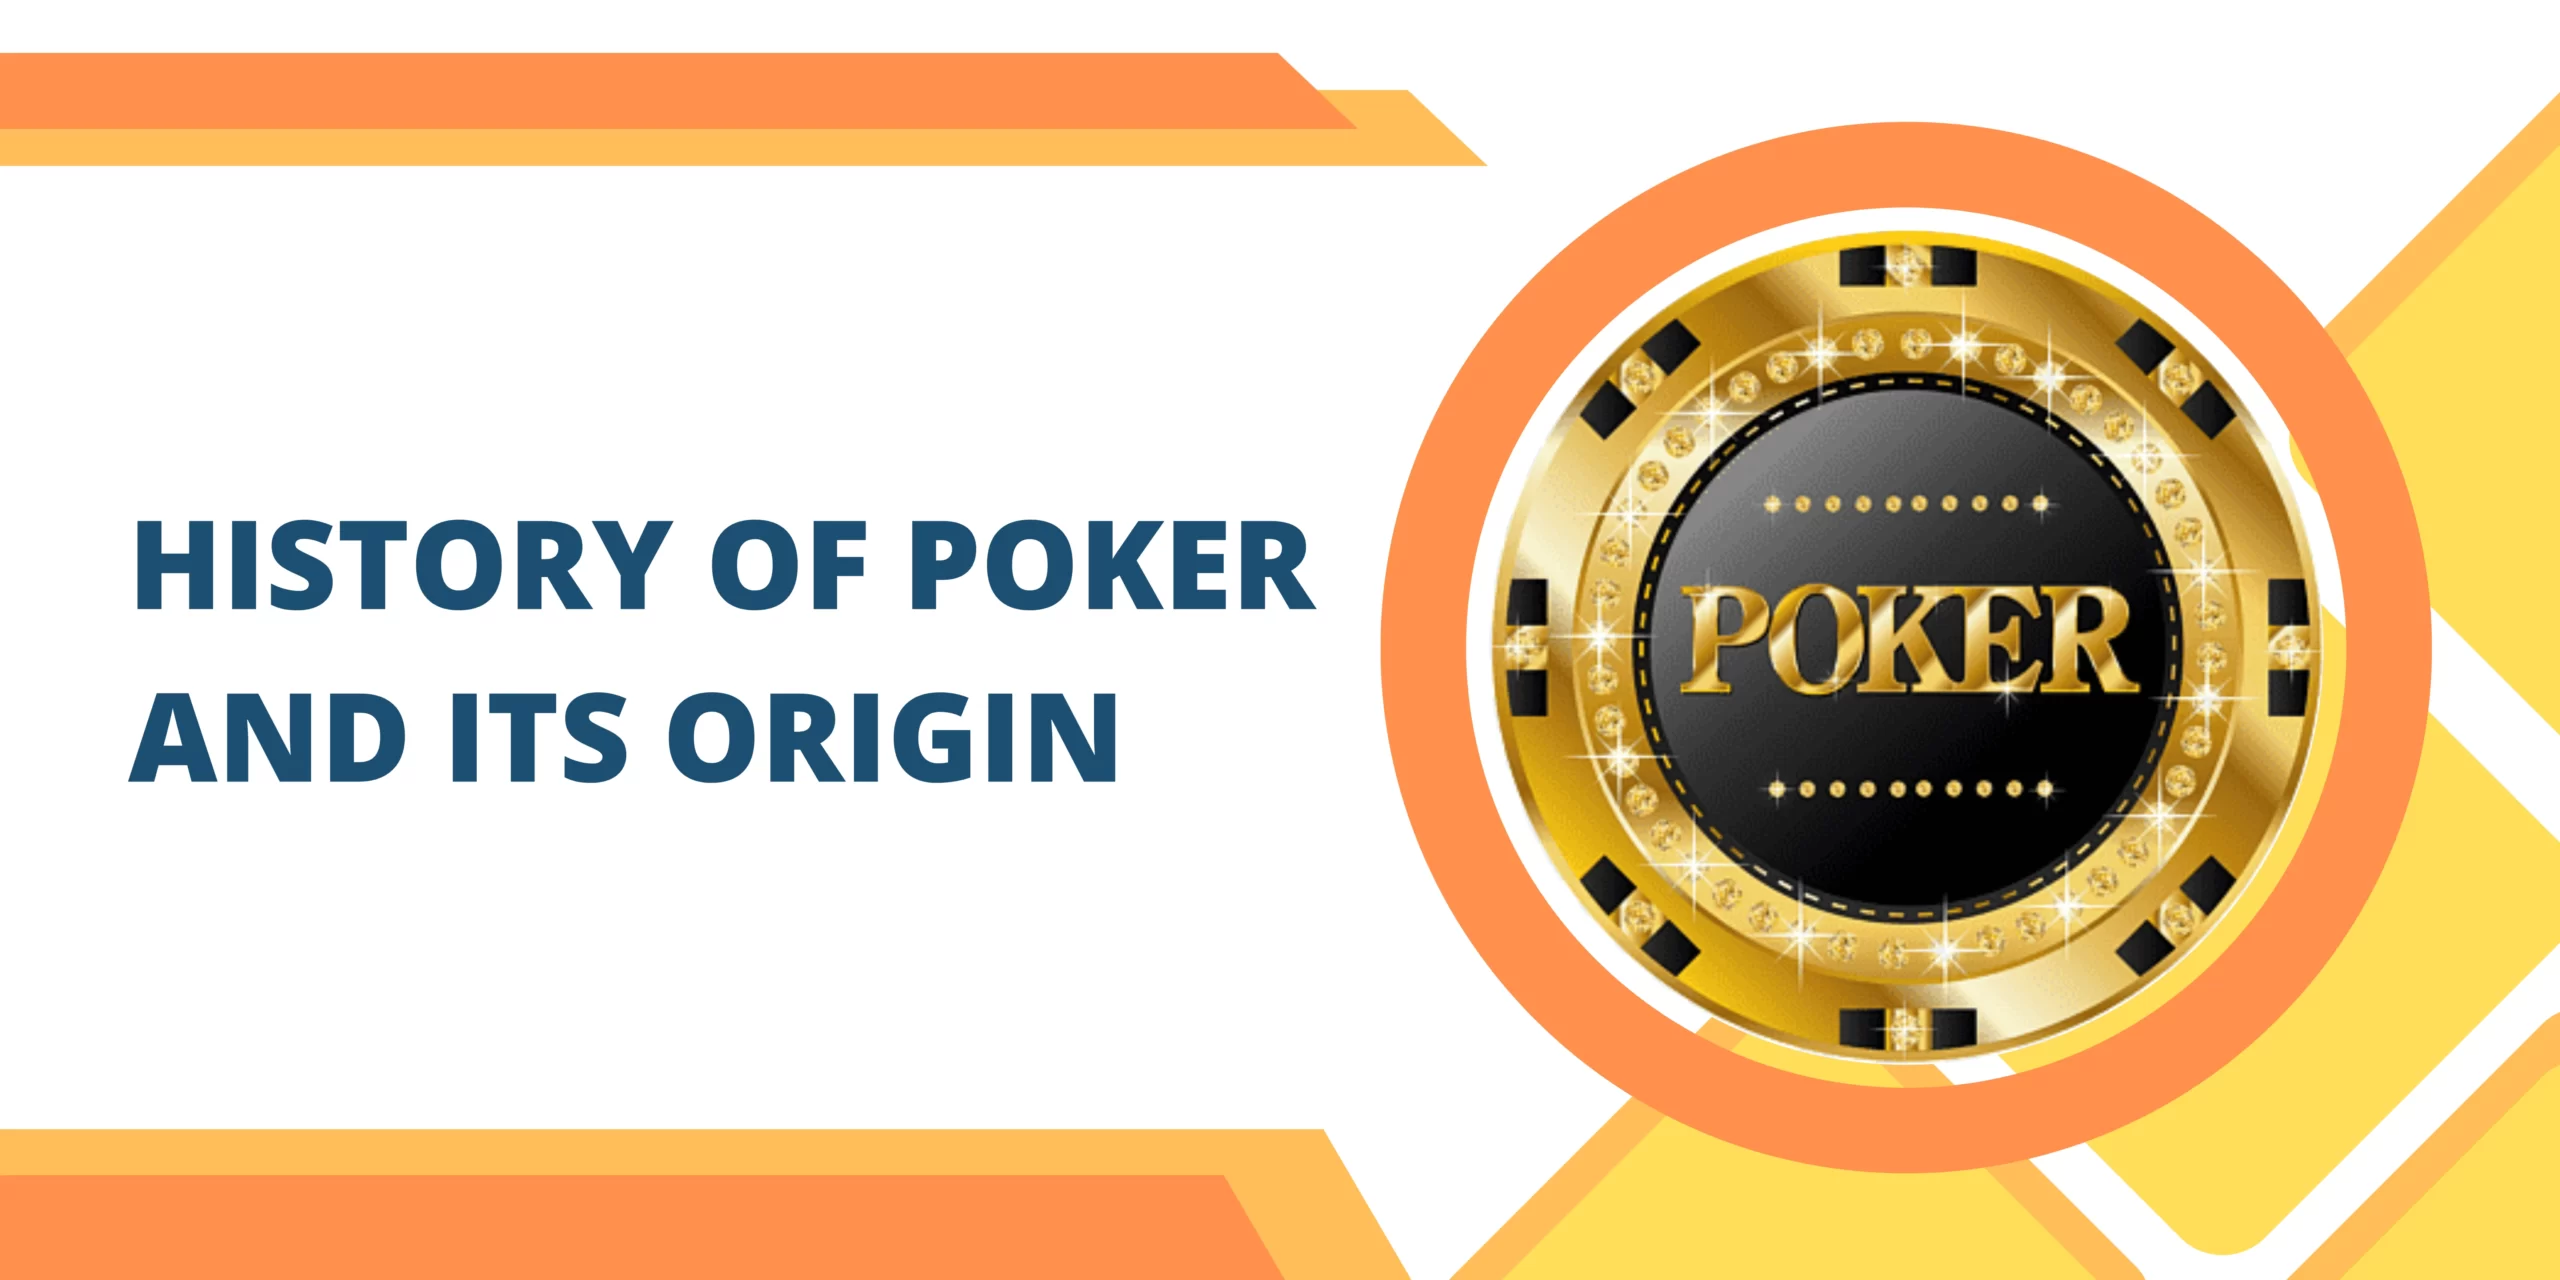 History of Poker and its Origin